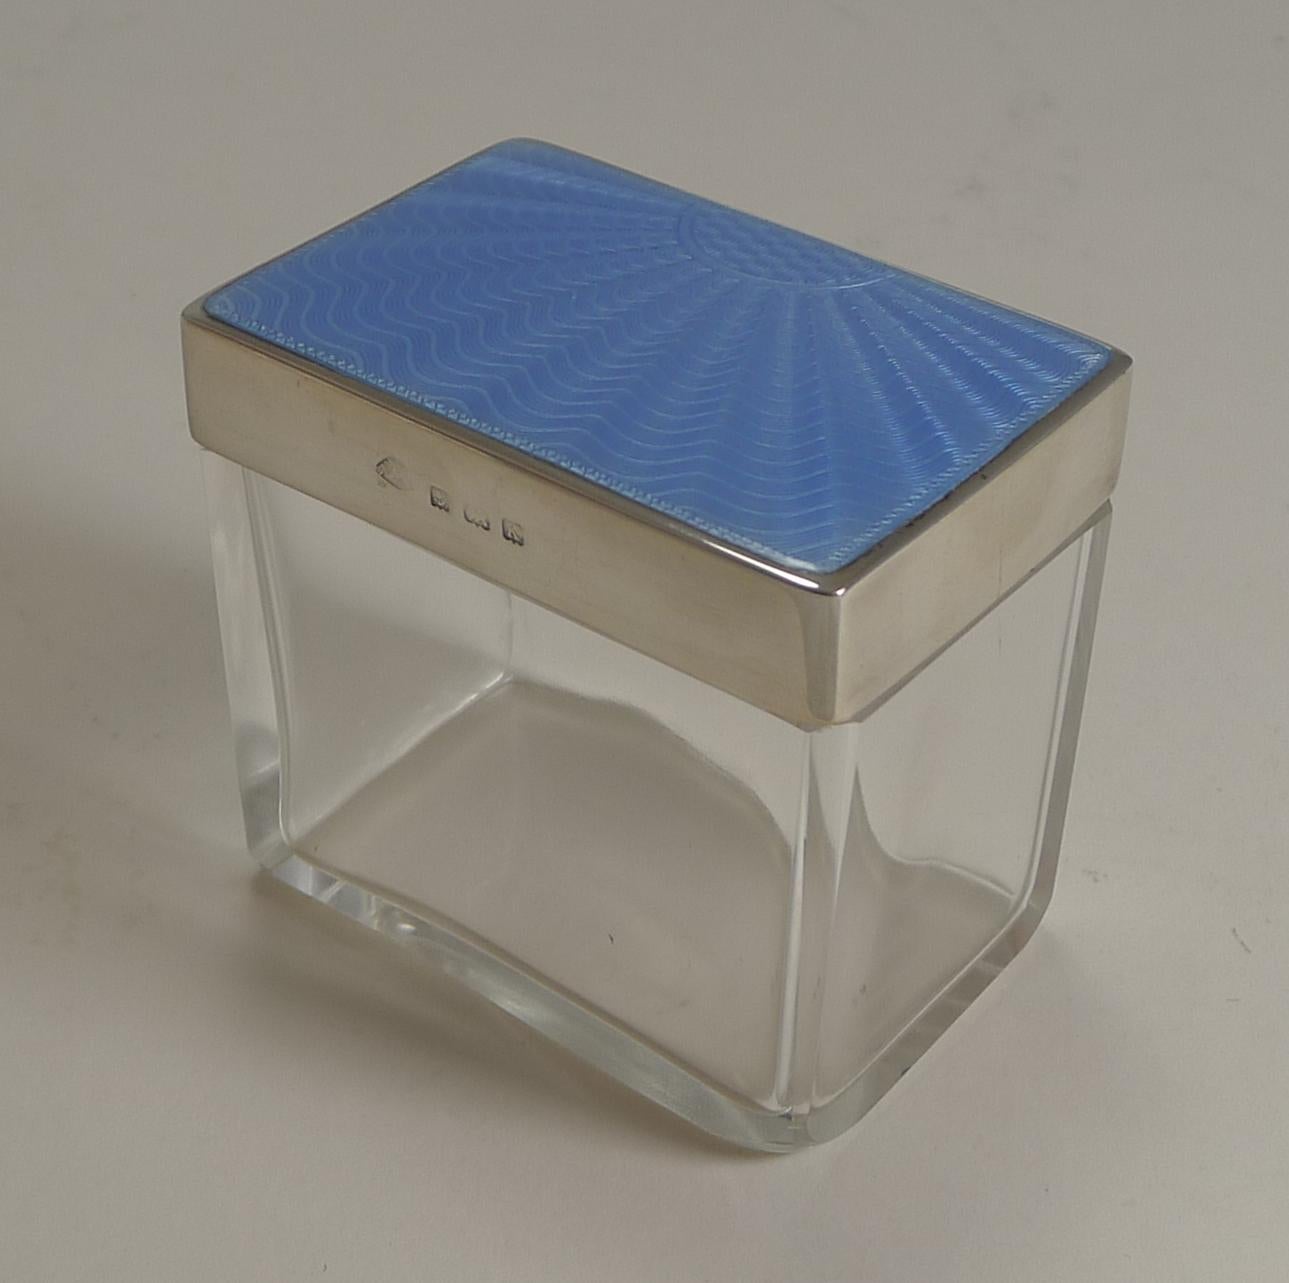 A fabulous vintage Art Deco vanity box made from a clean crystal and topped with a sterling silver lid hallmarked for Birmingham 1934; the makers mark is also present for the silversmith's, Adie Brothers.

The top of lid is decorated with a